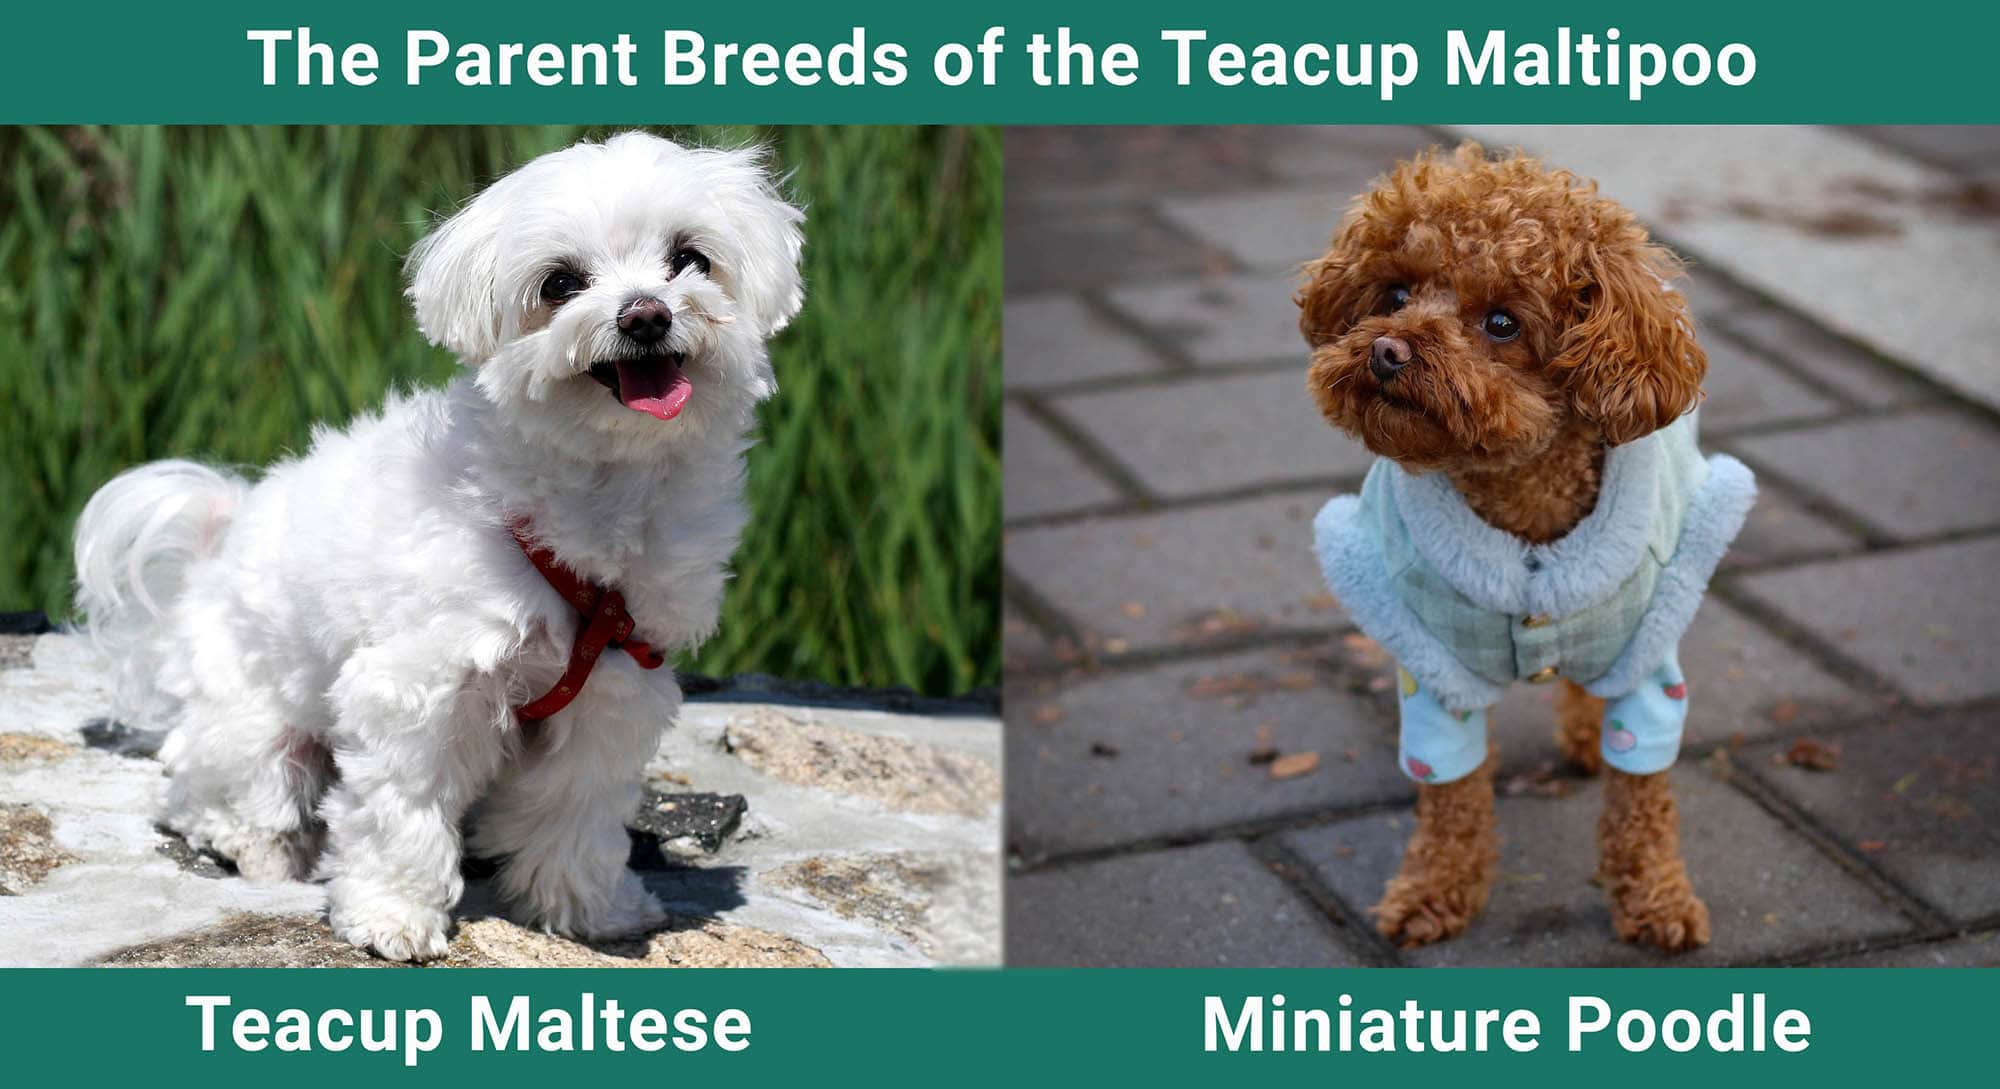 The Parent Breeds of the Teacup Maltipoo